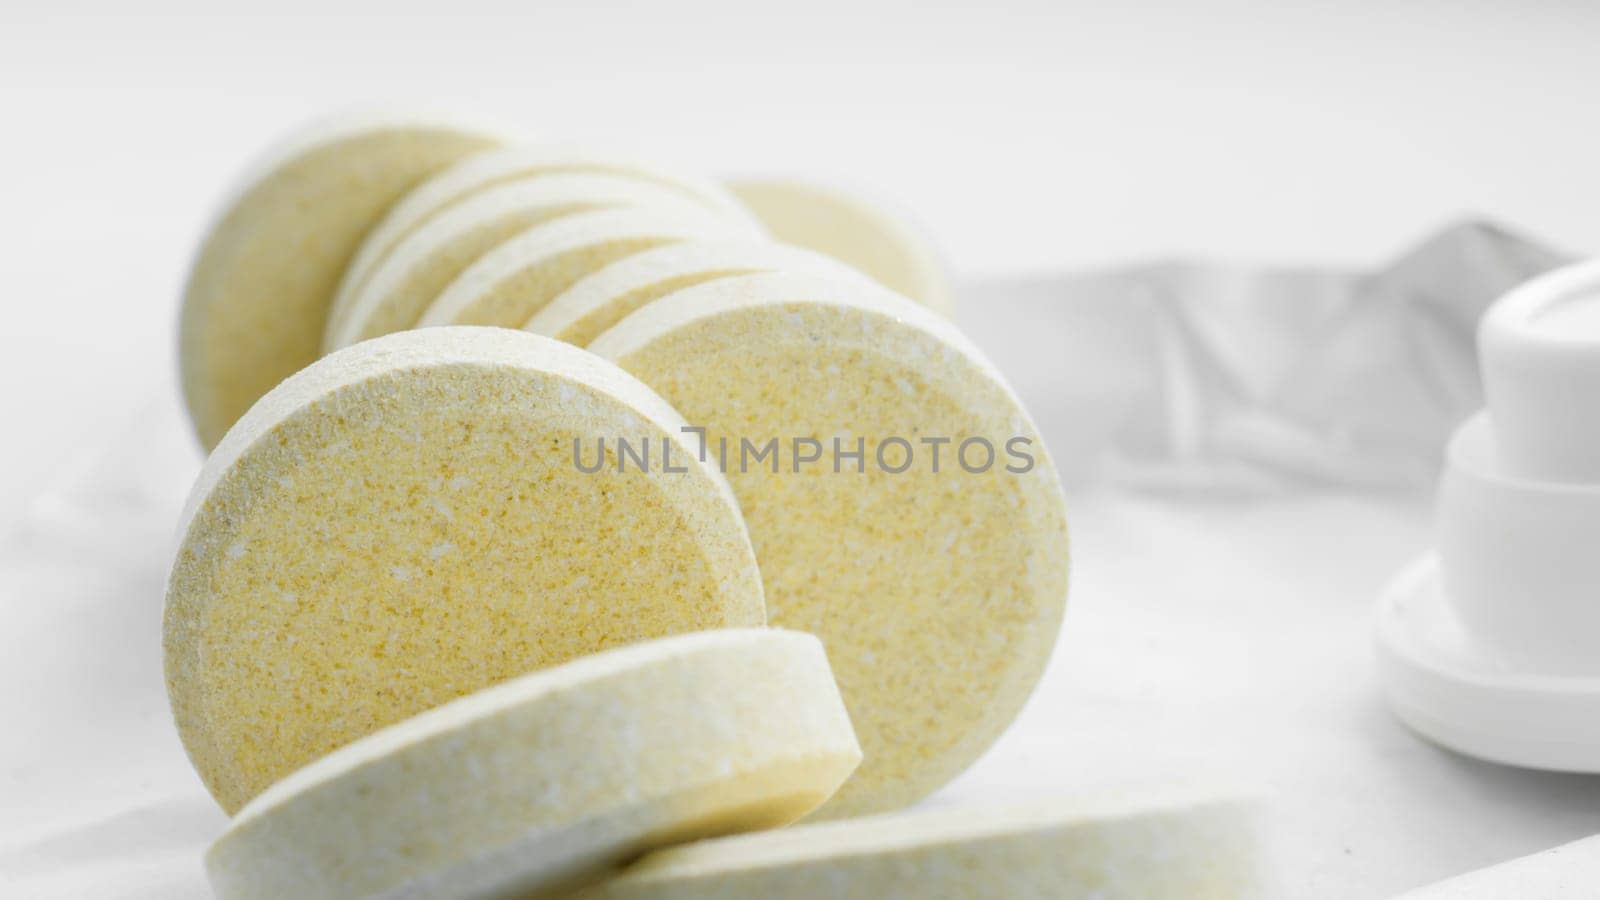 Vitamins and nutritional supplements. Heap of soluble effervescent vitamin tablets on a white background. Health care and medical. Front view.